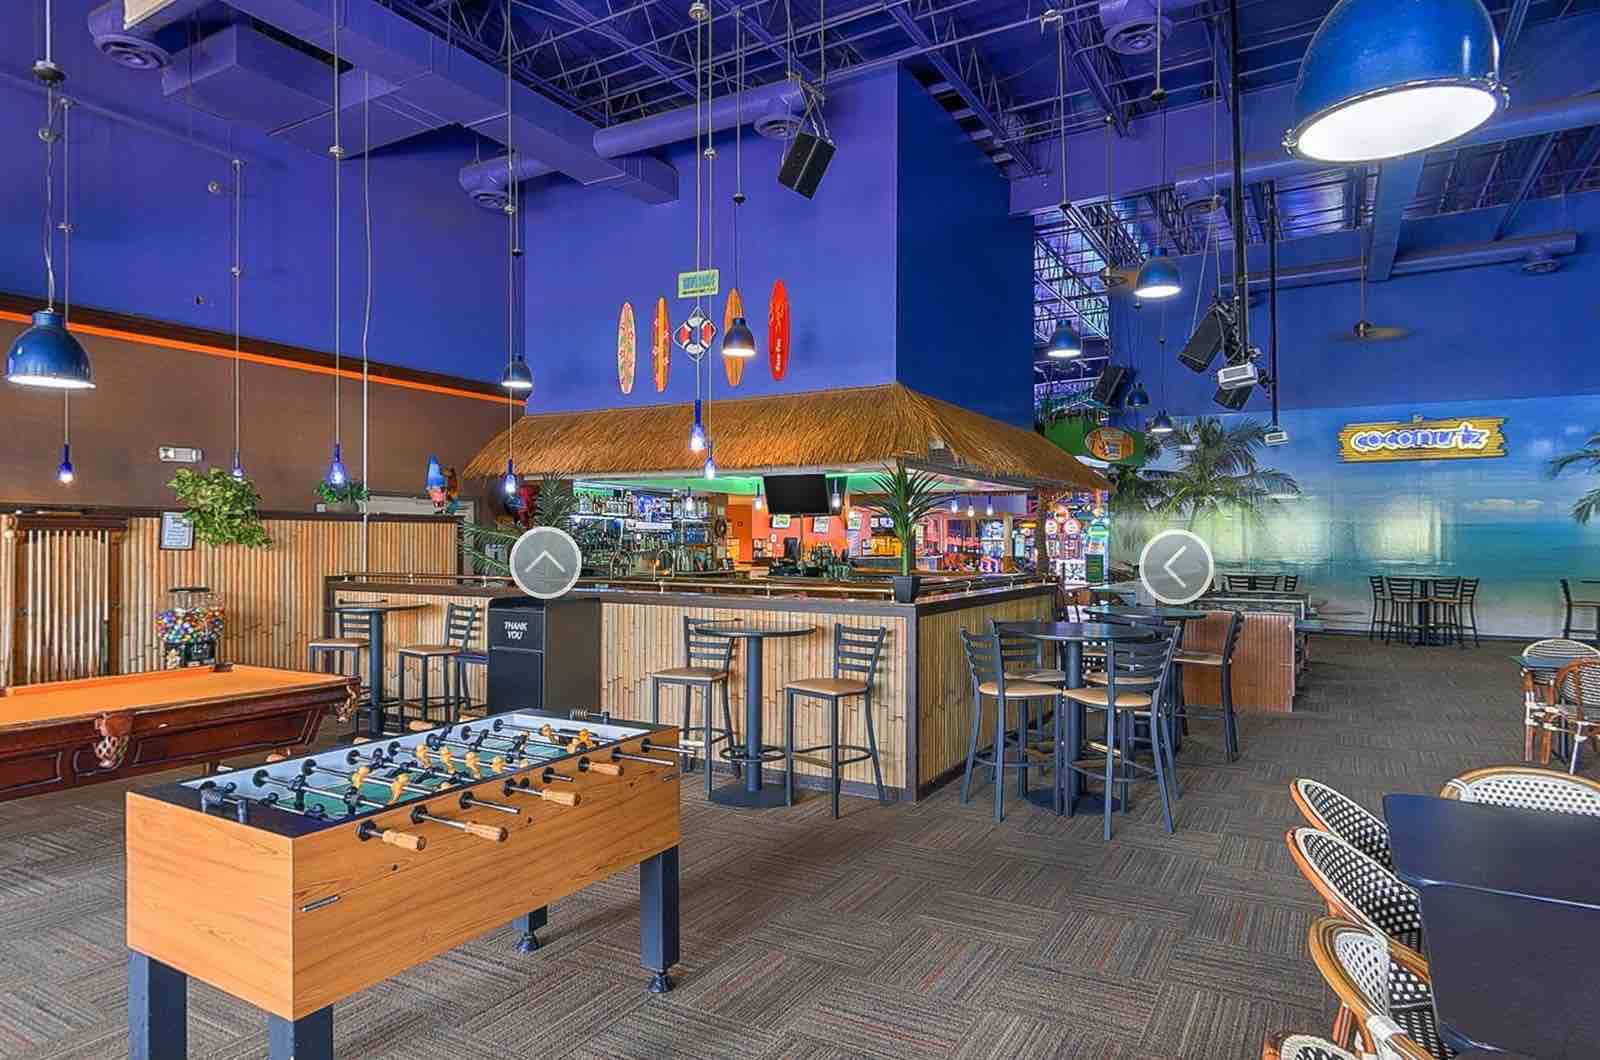 360 Virtual Tours For Gaming Centers and Entertainment Centers